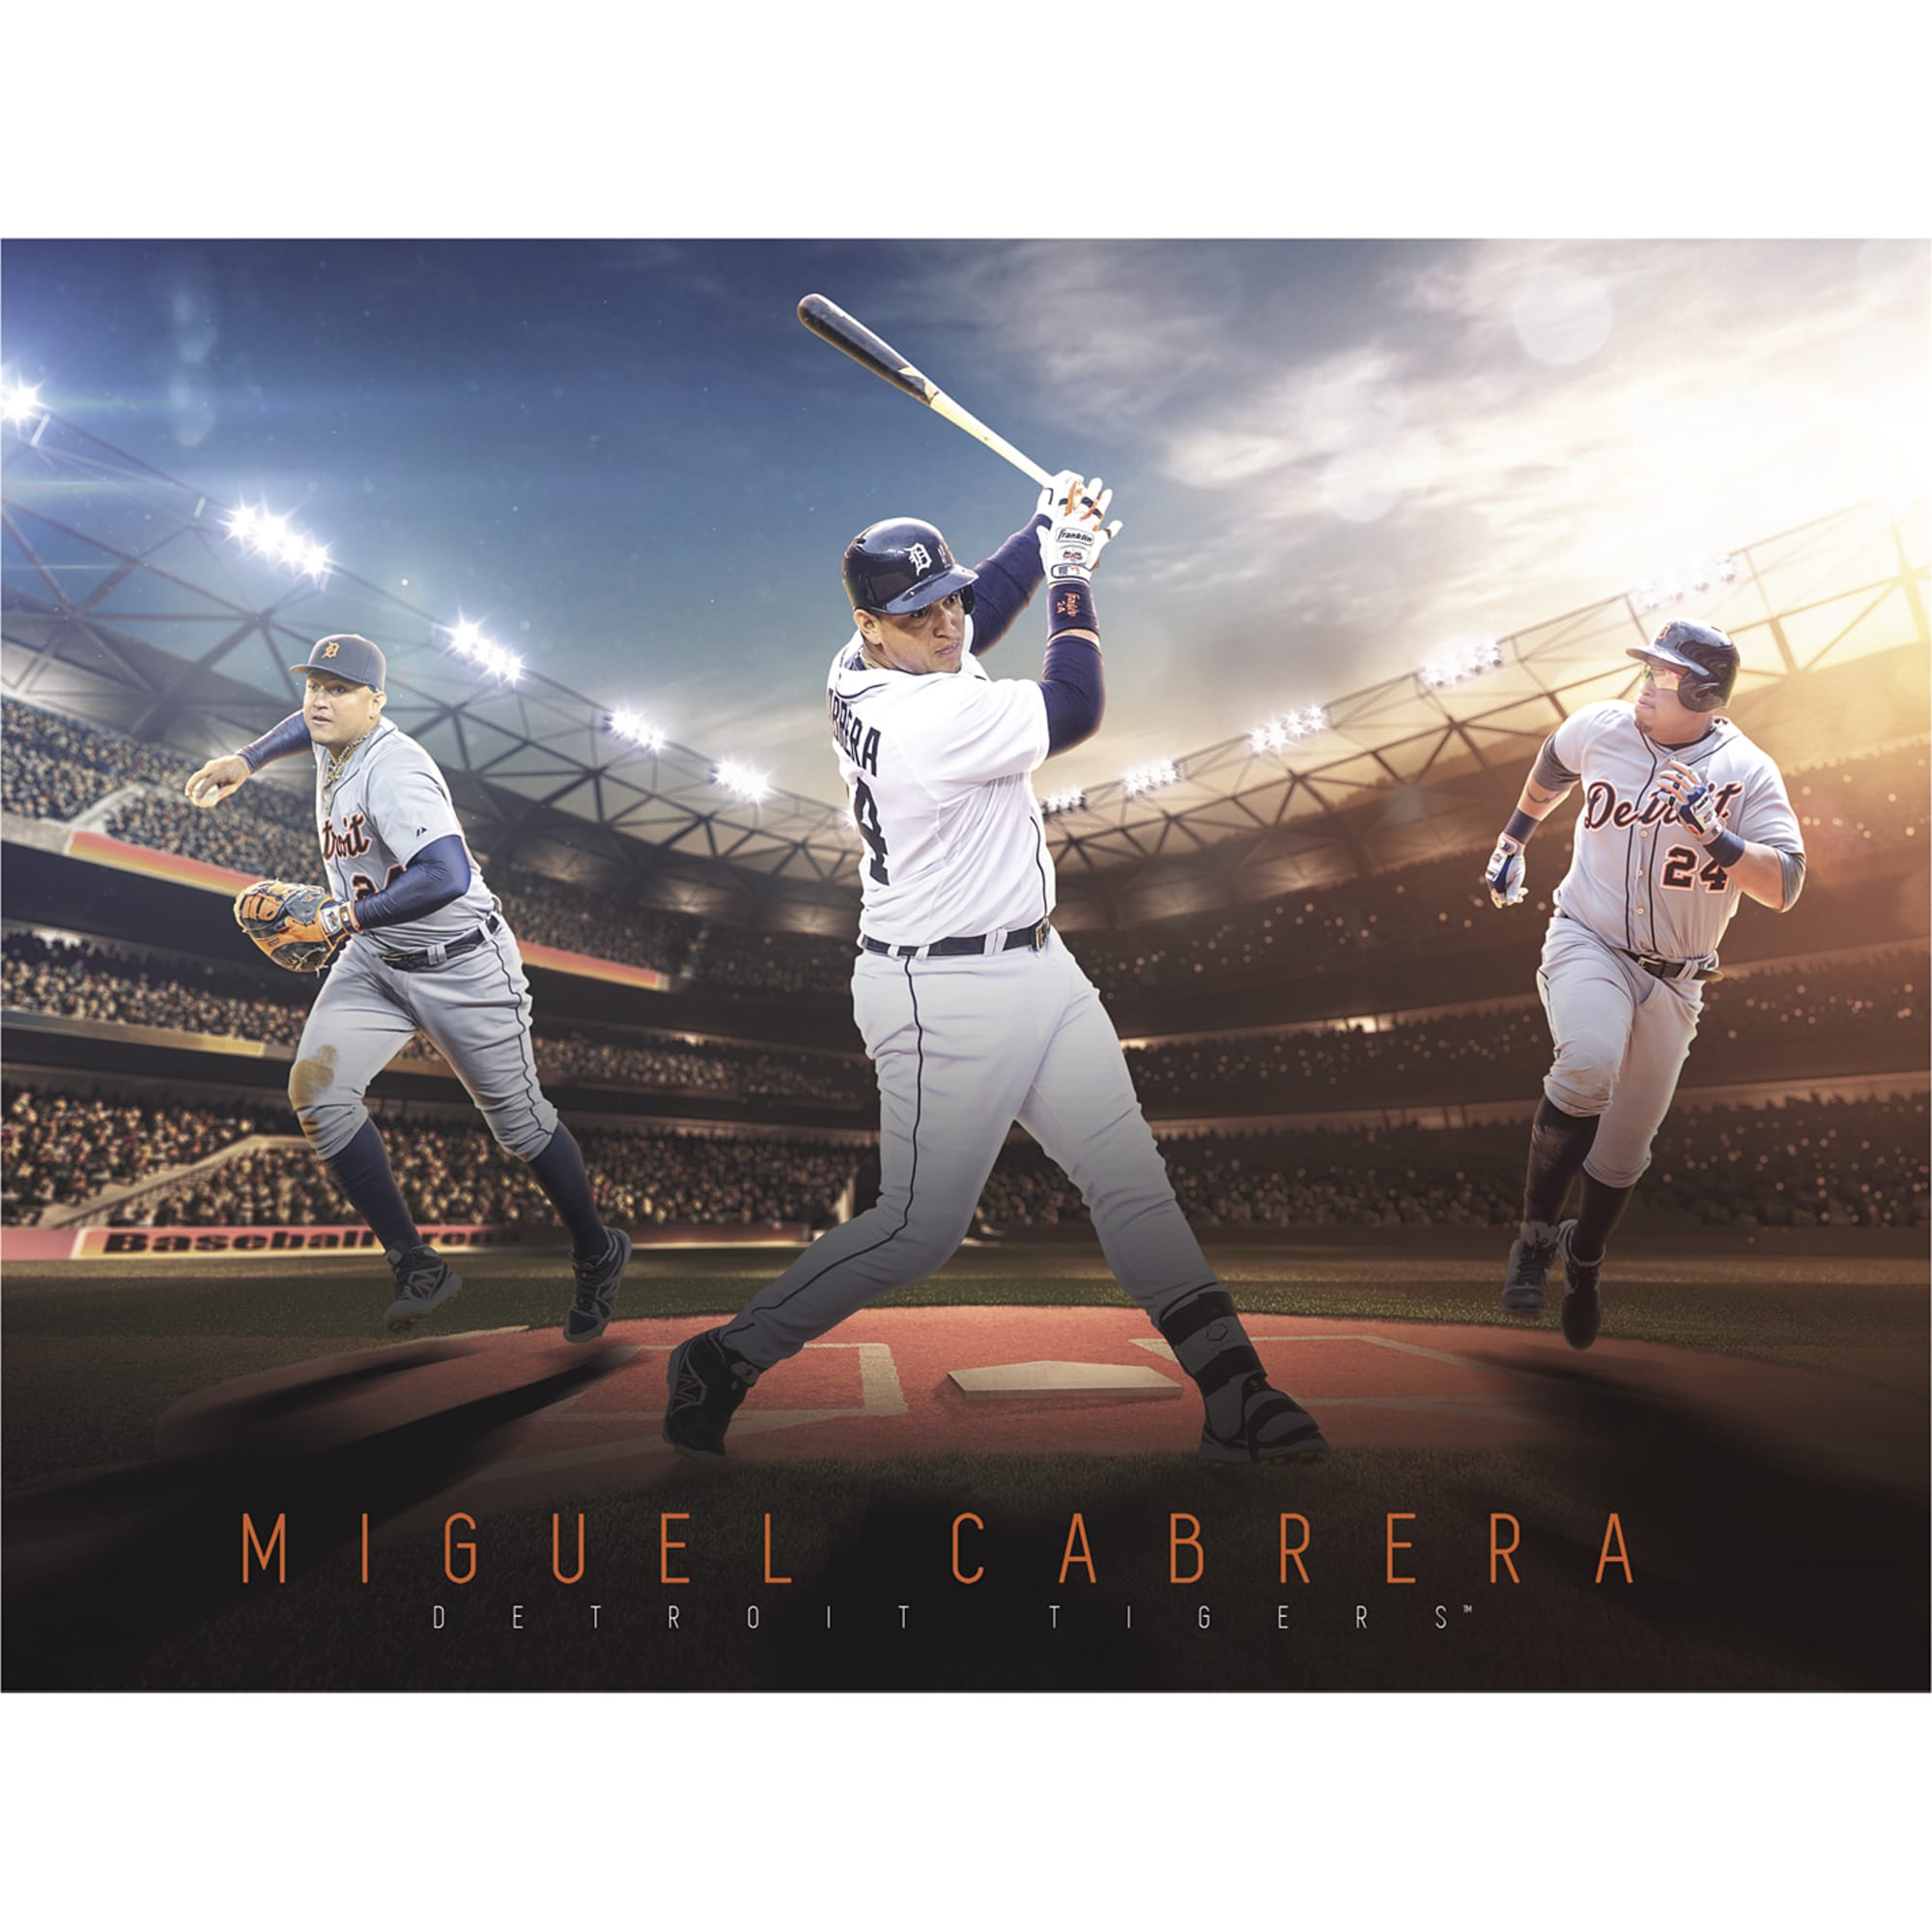 Detroit Tigers: Miguel Cabrera Montage Mural - Officially Licensed MLB